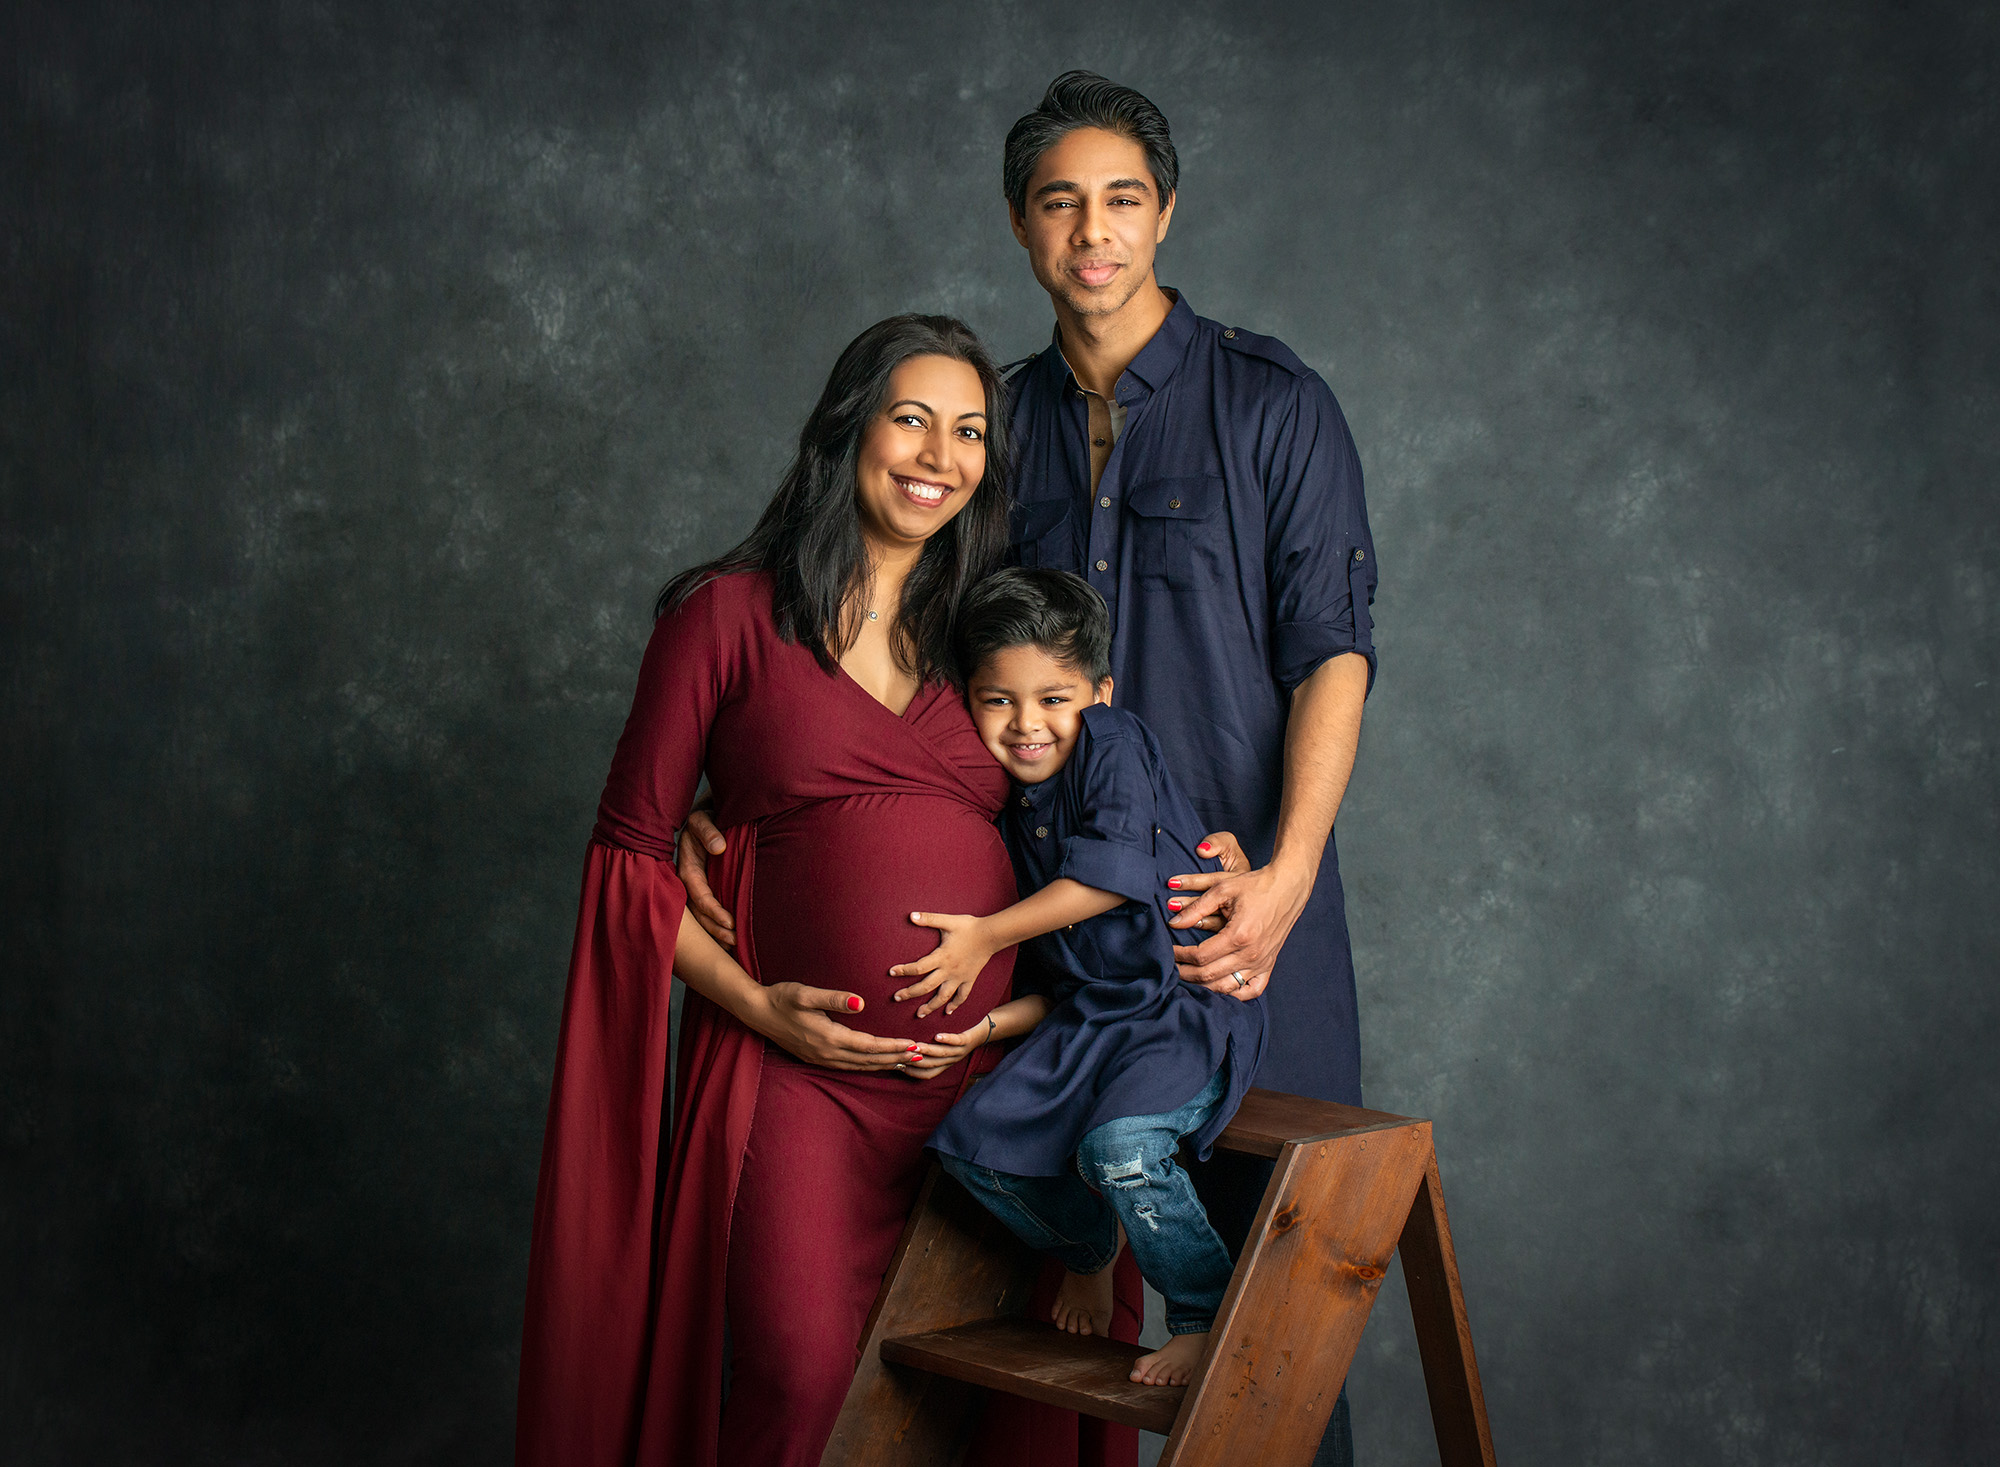 Family Maternity Photos young boy smiling while touching his mothers pregnant stomach while posing with dad